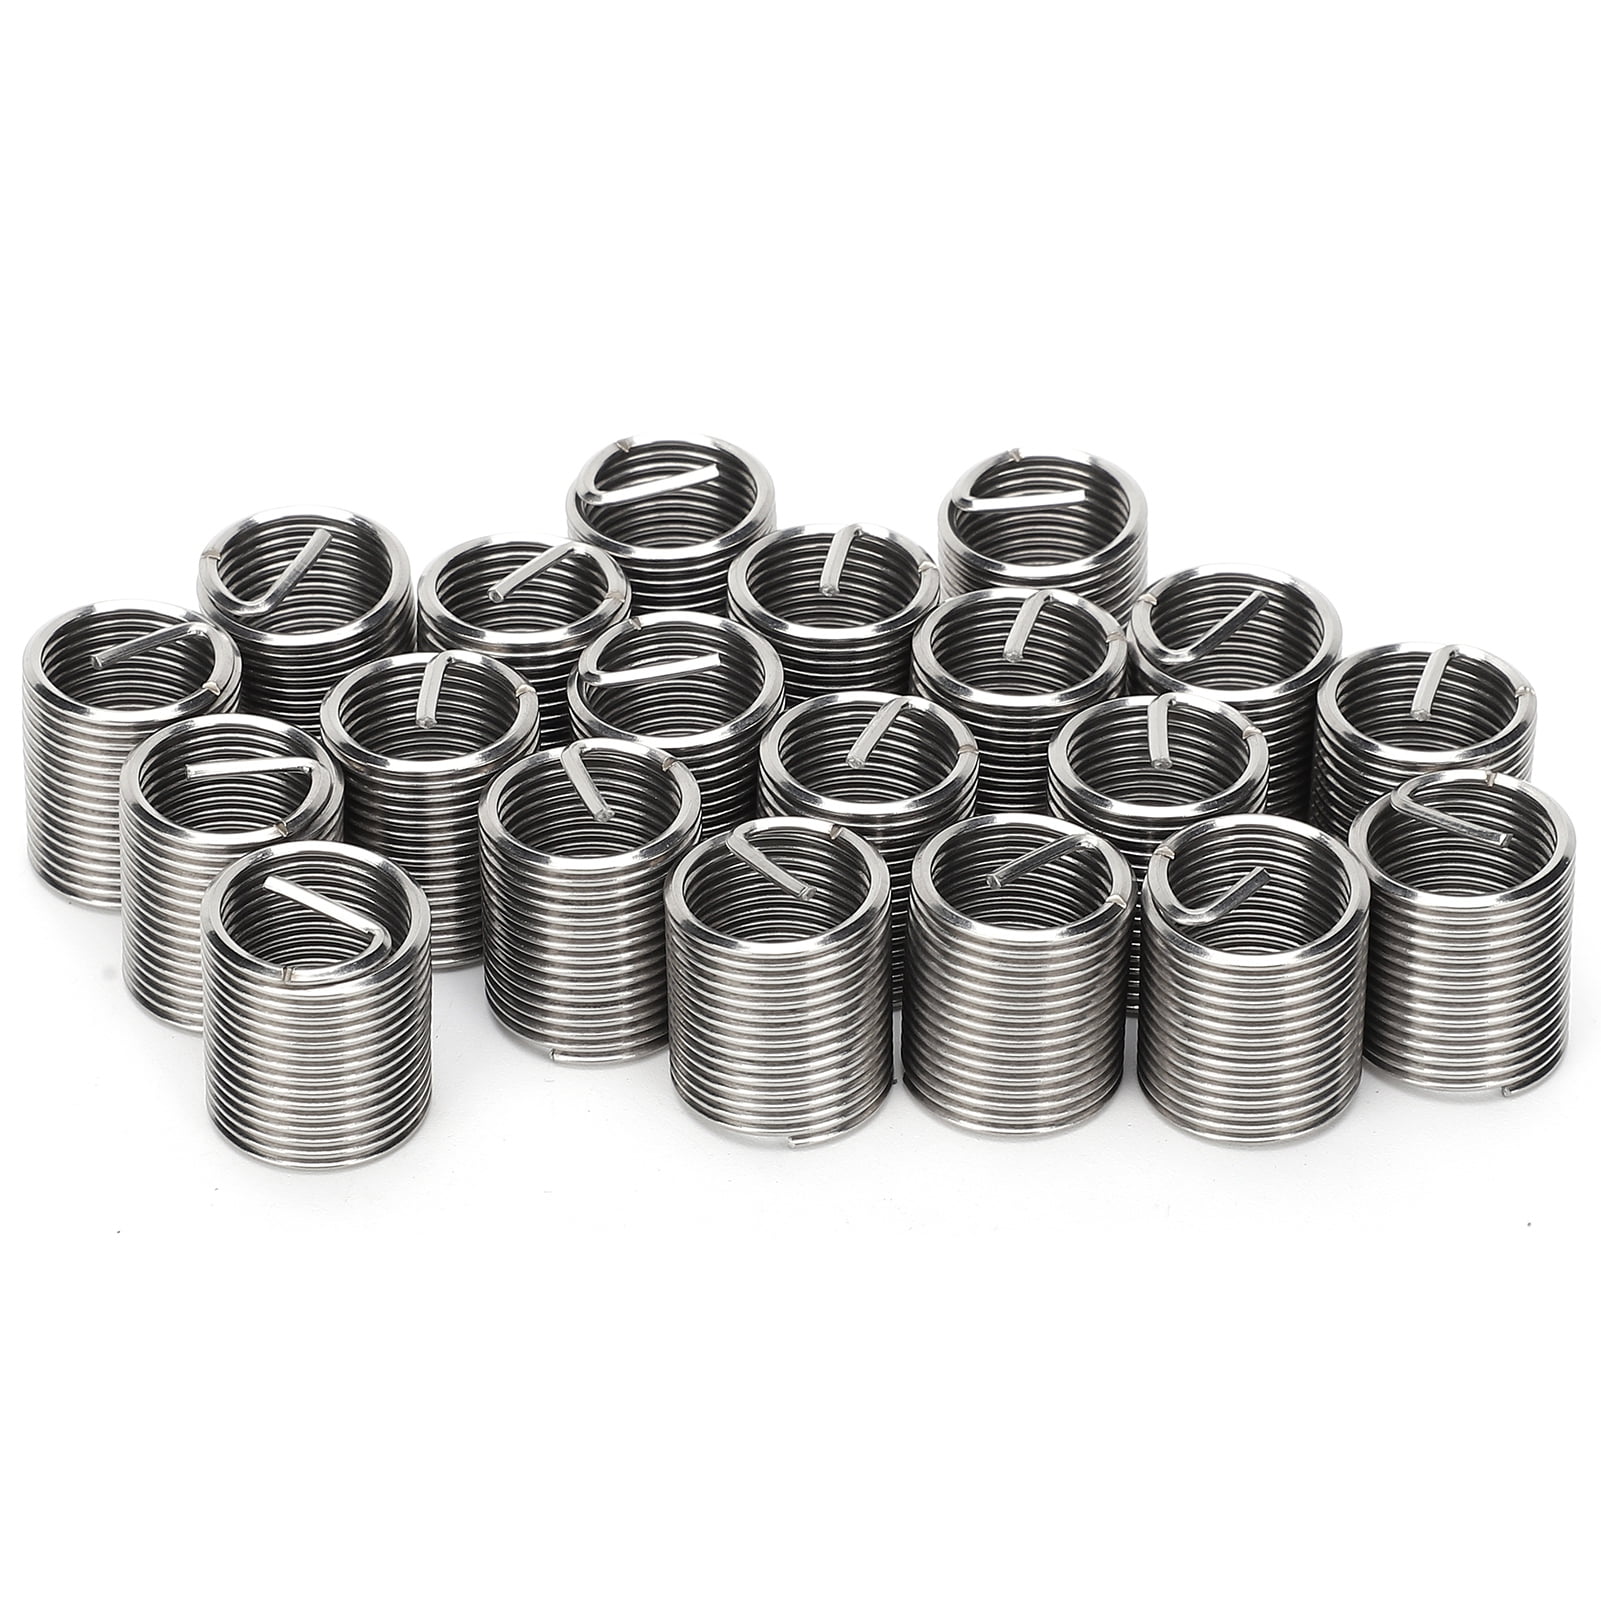 M14x1.5 Kit with 28mm stainless steel inserts 